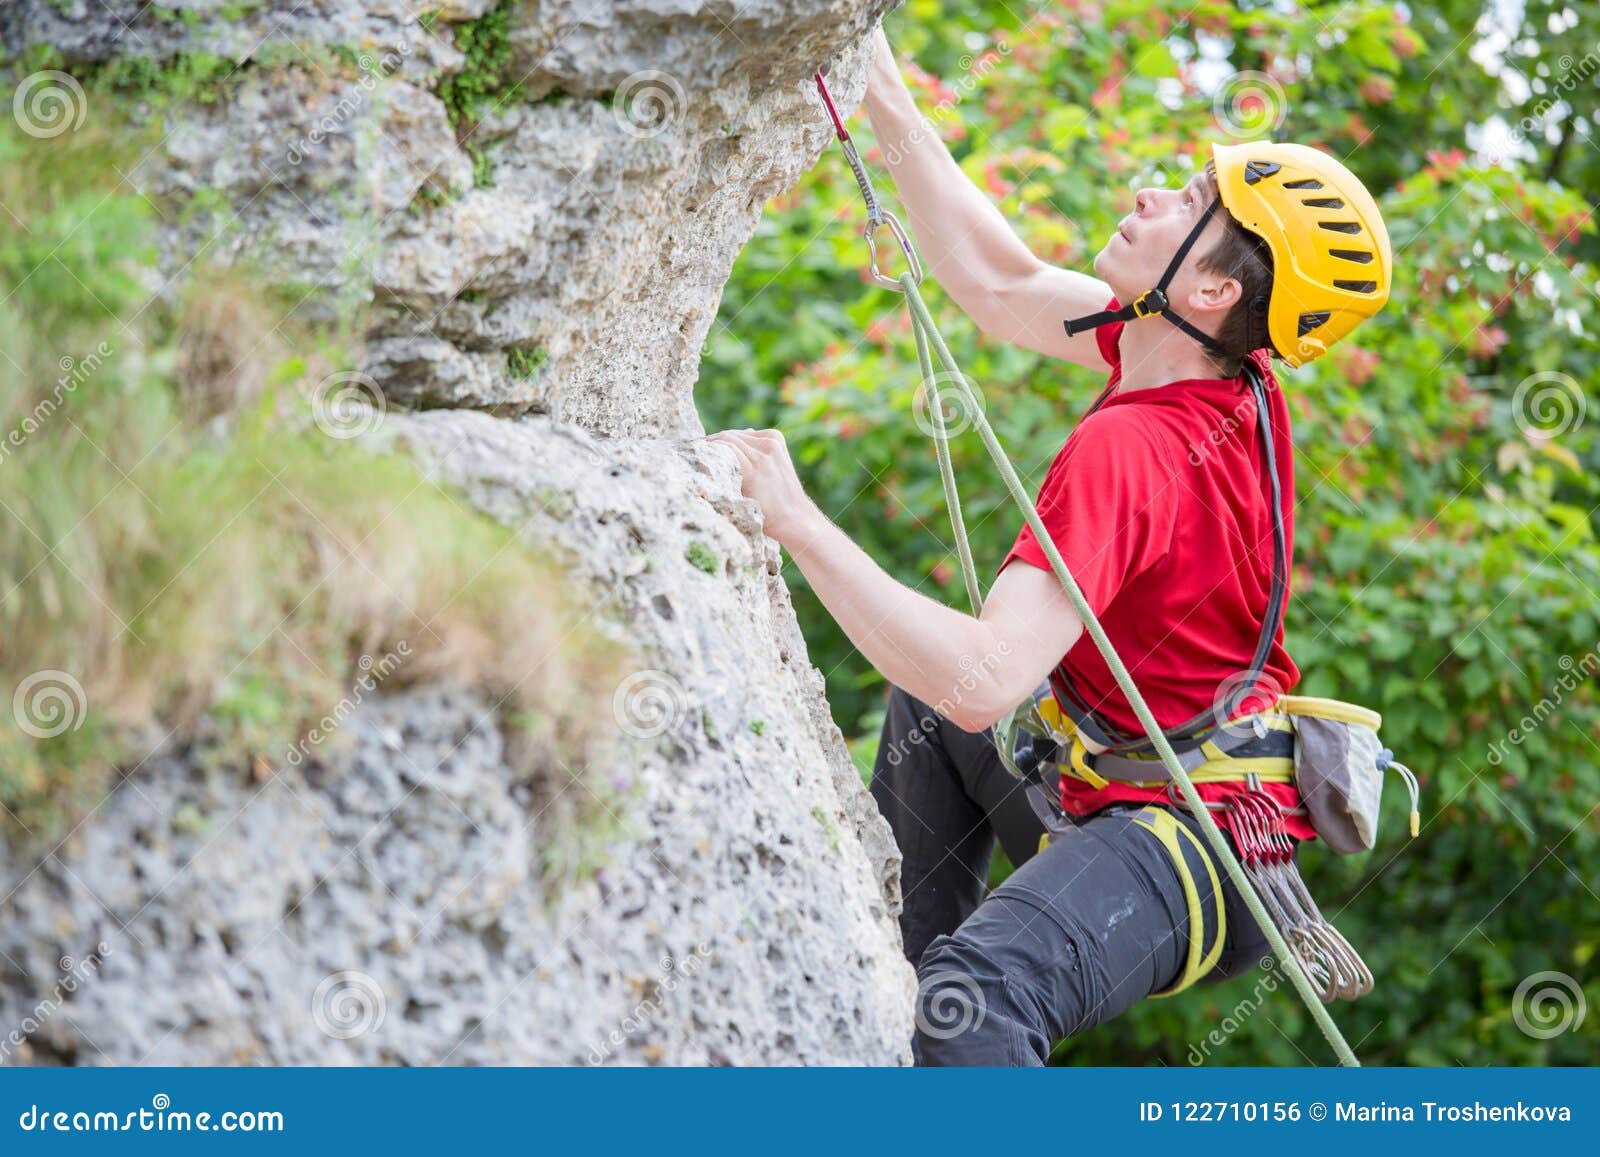 photo of sports man in helmet clambering over rock against background of green trees